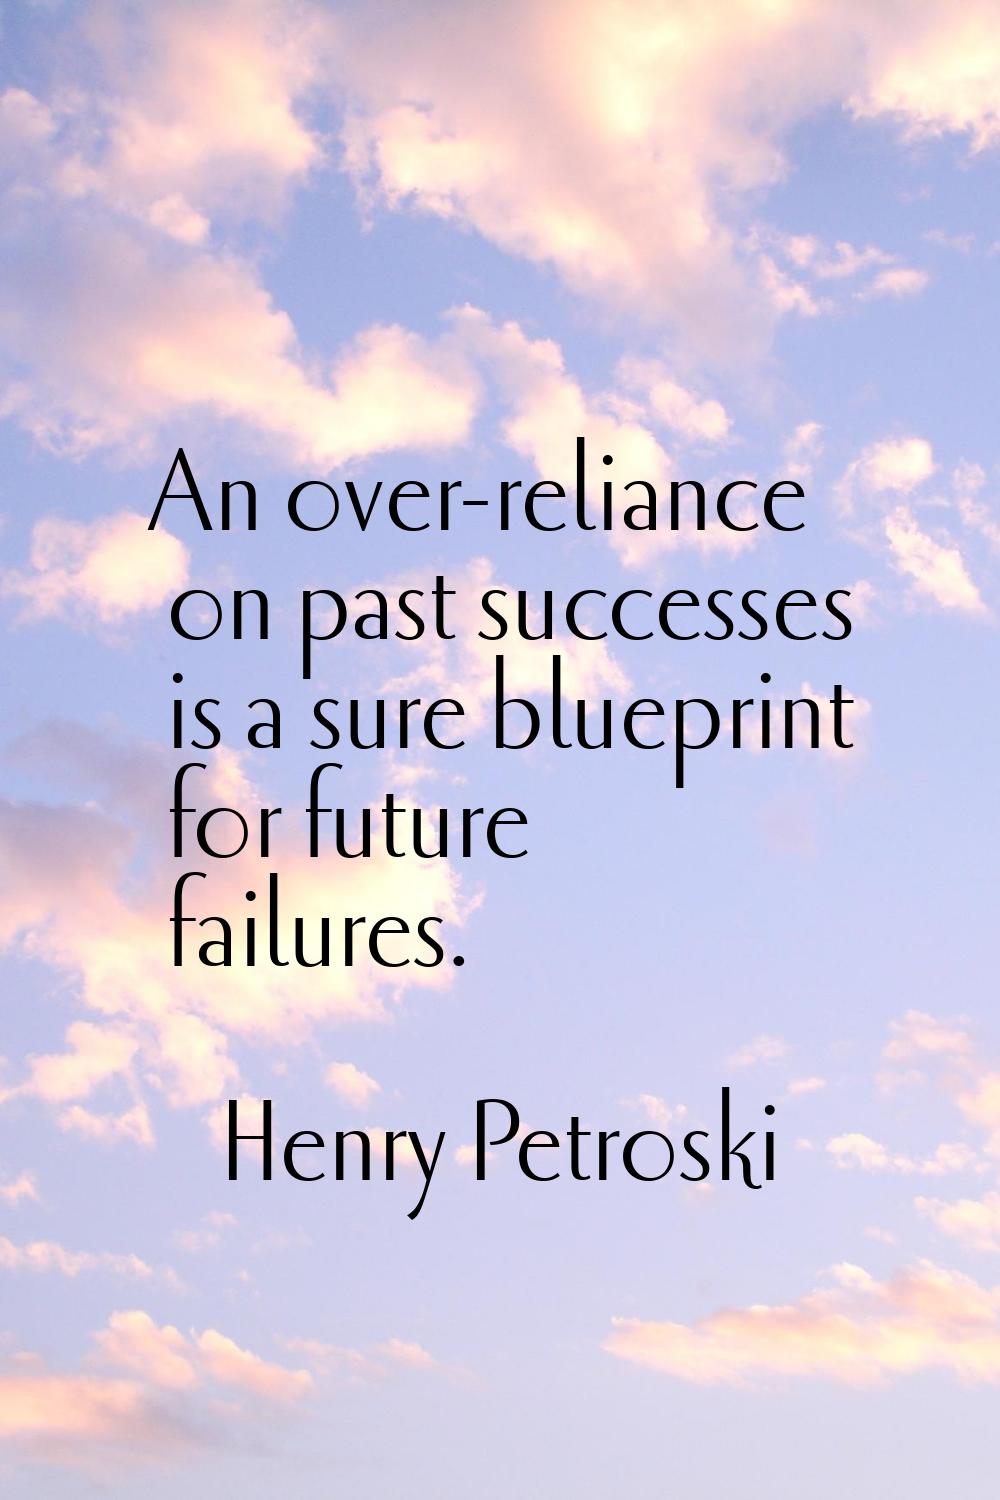 An over-reliance on past successes is a sure blueprint for future failures.